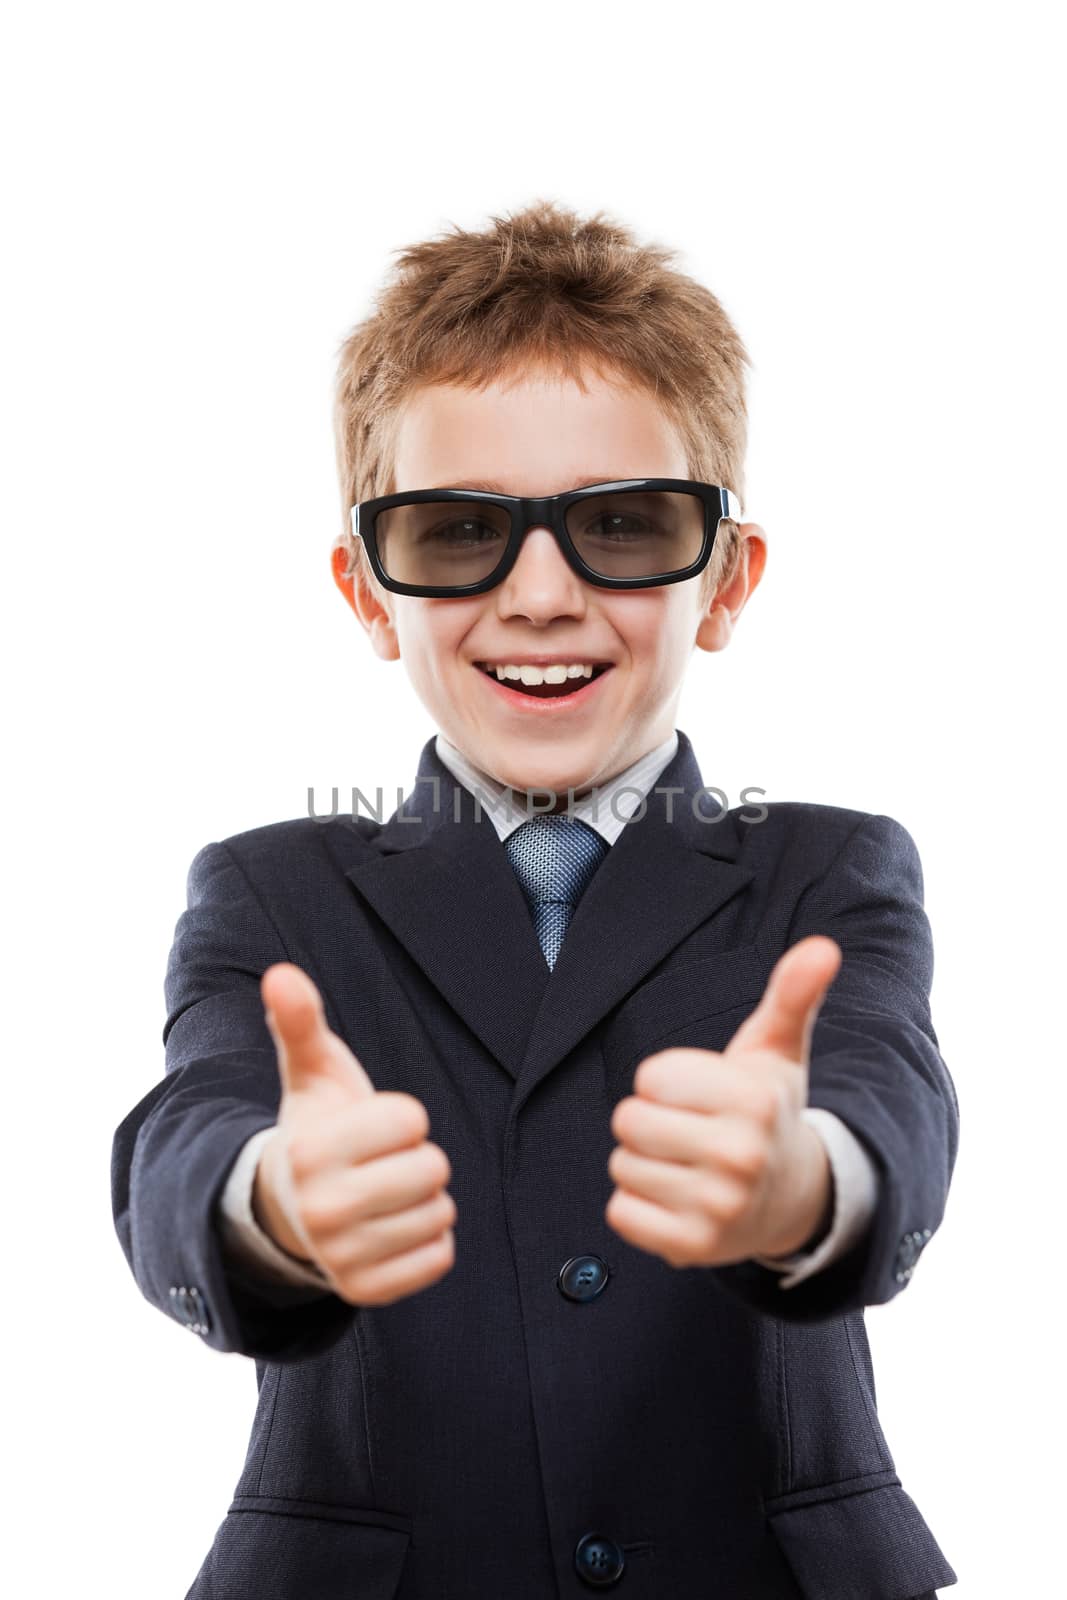 Smiling child boy in business suit wearing sunglasses gesturing  by ia_64